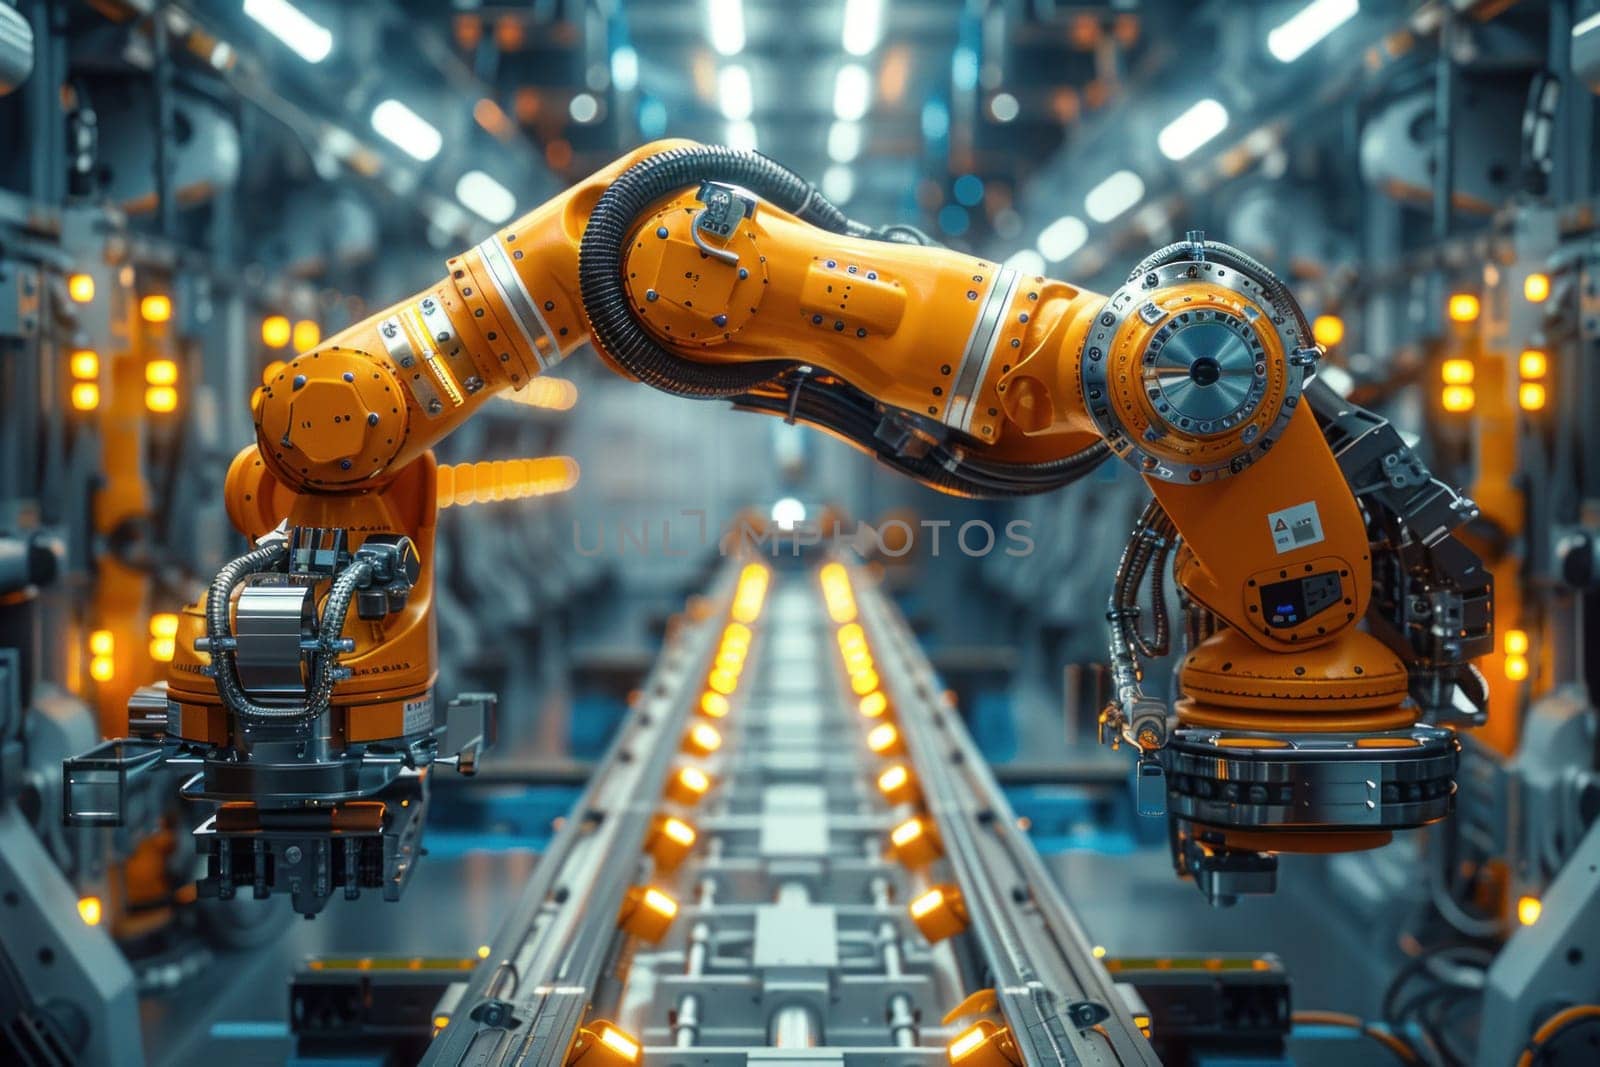 A robotic arm in a factory setting moves along a conveyor belt, performing automated tasks in the manufacturing process.